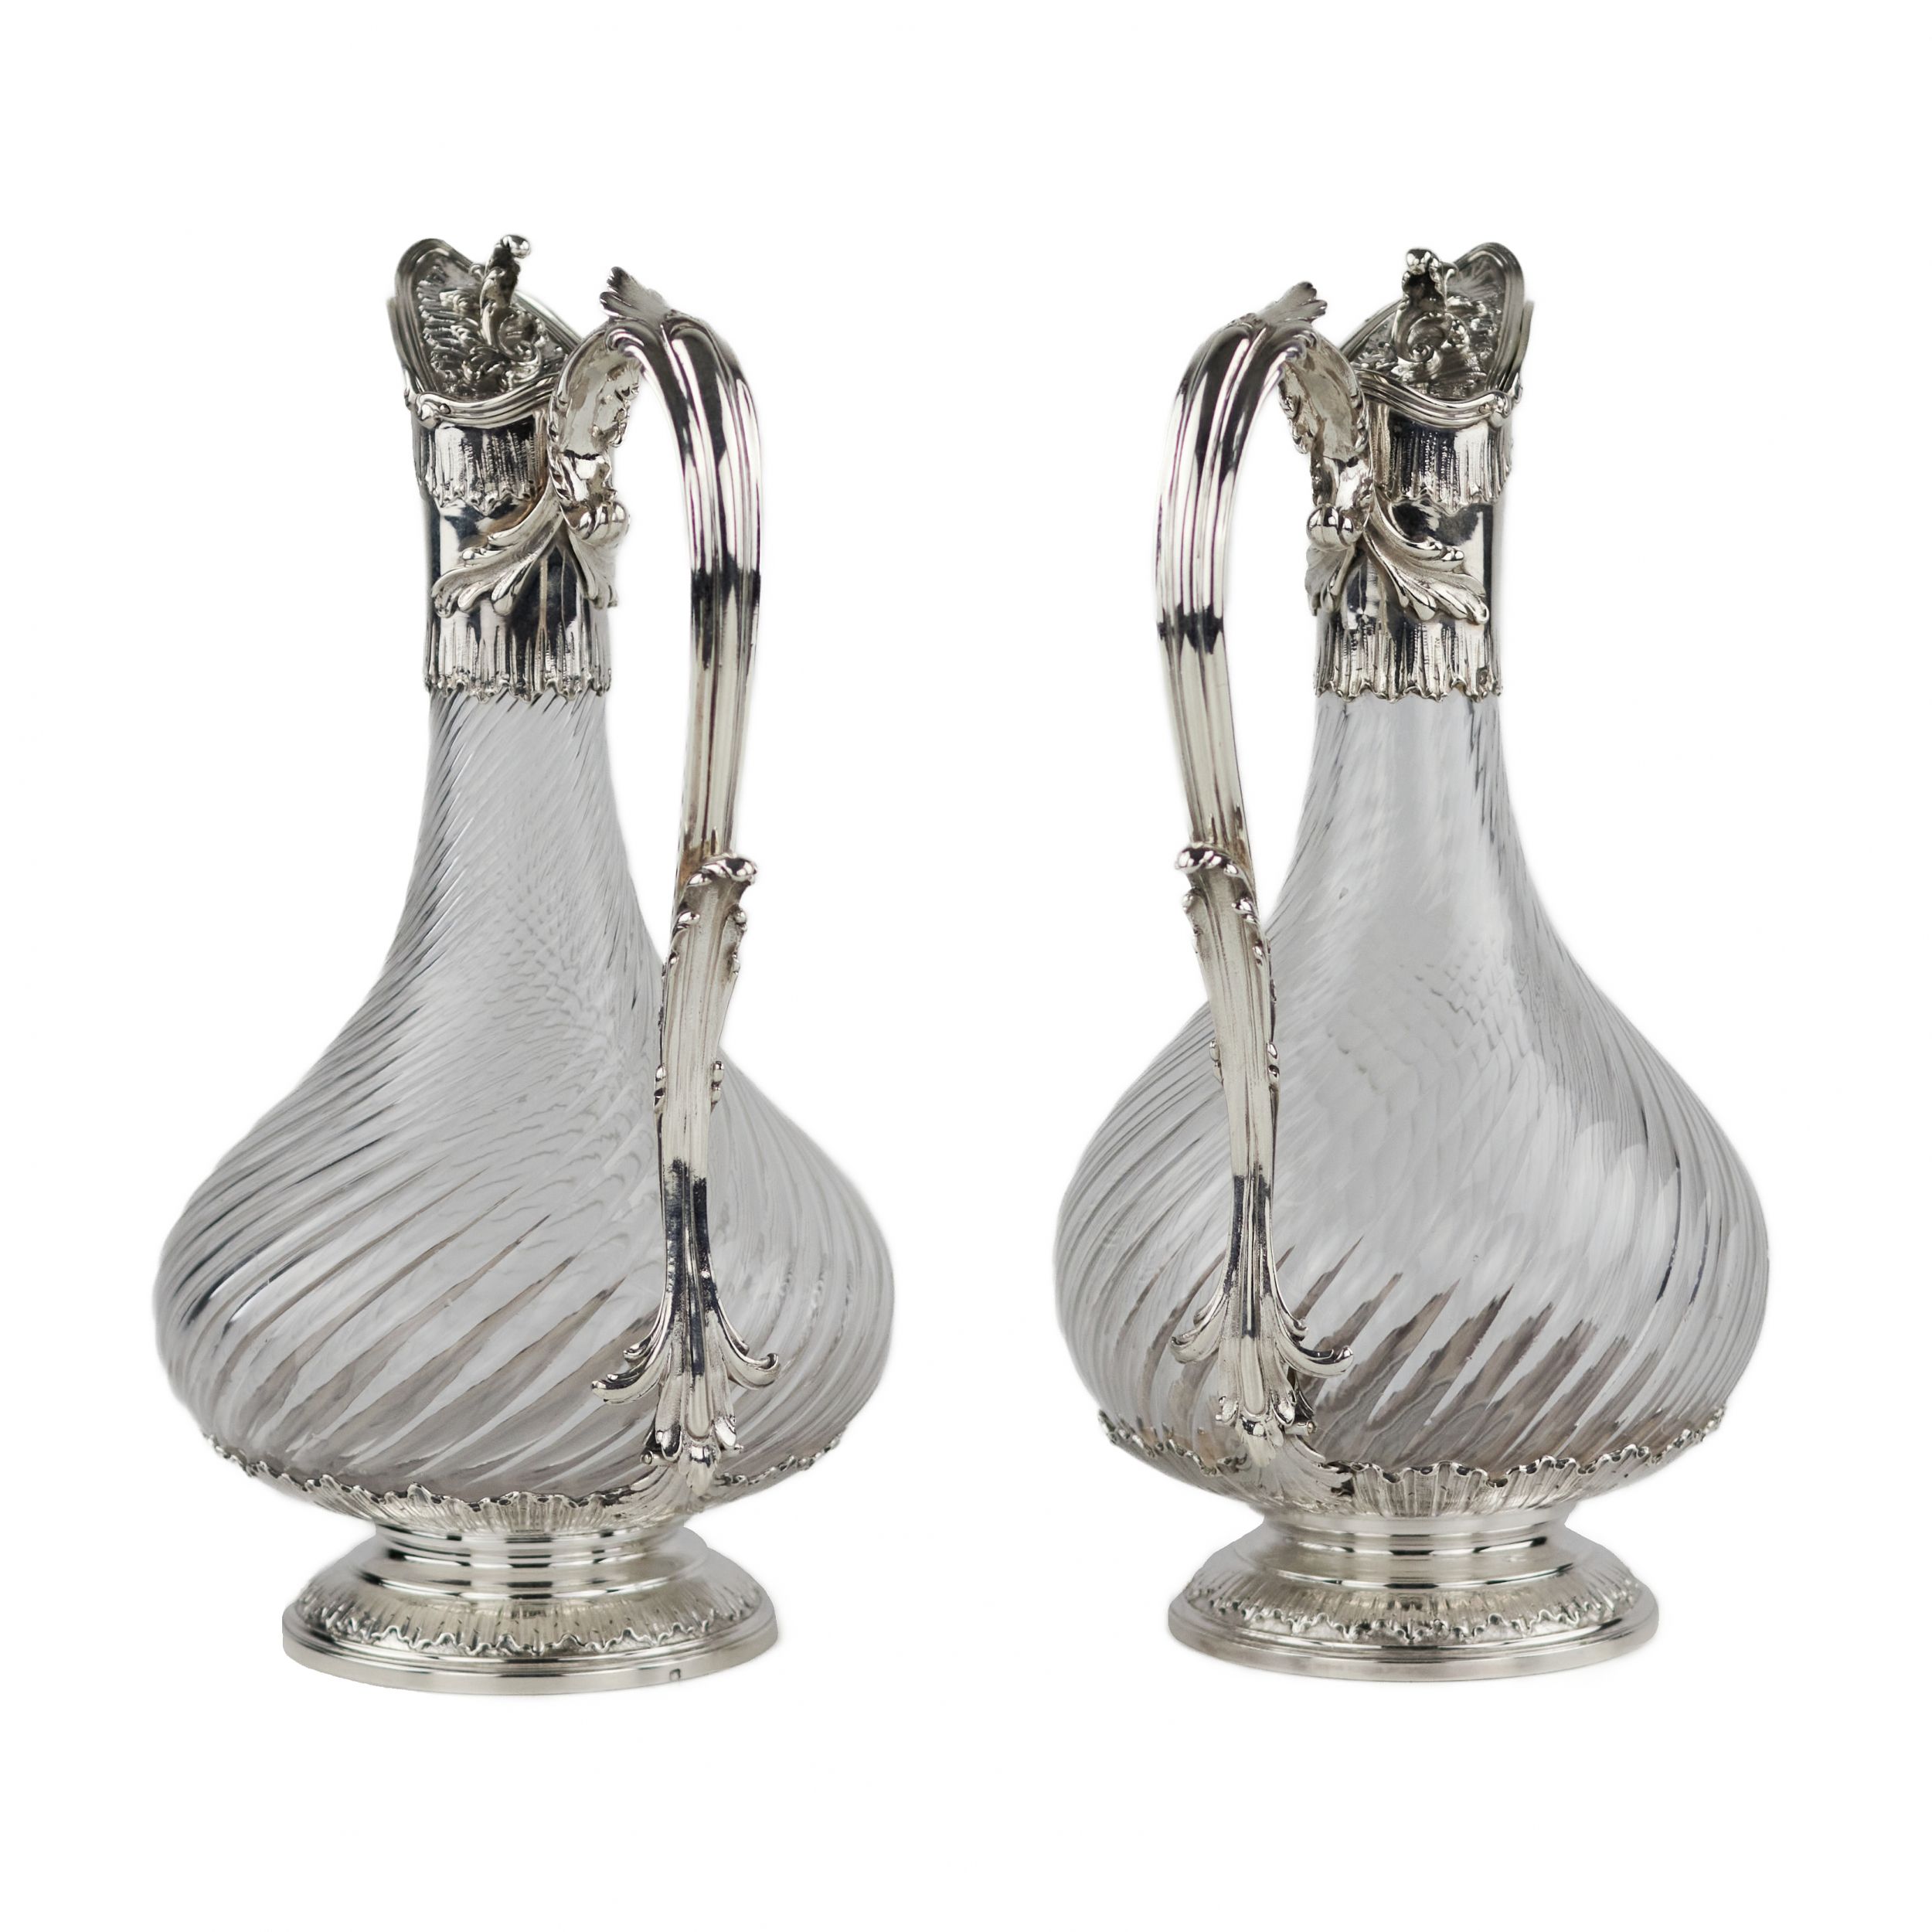 Pair of French, spiral glass wine jugs with silver. Late 19th century. - Image 2 of 6